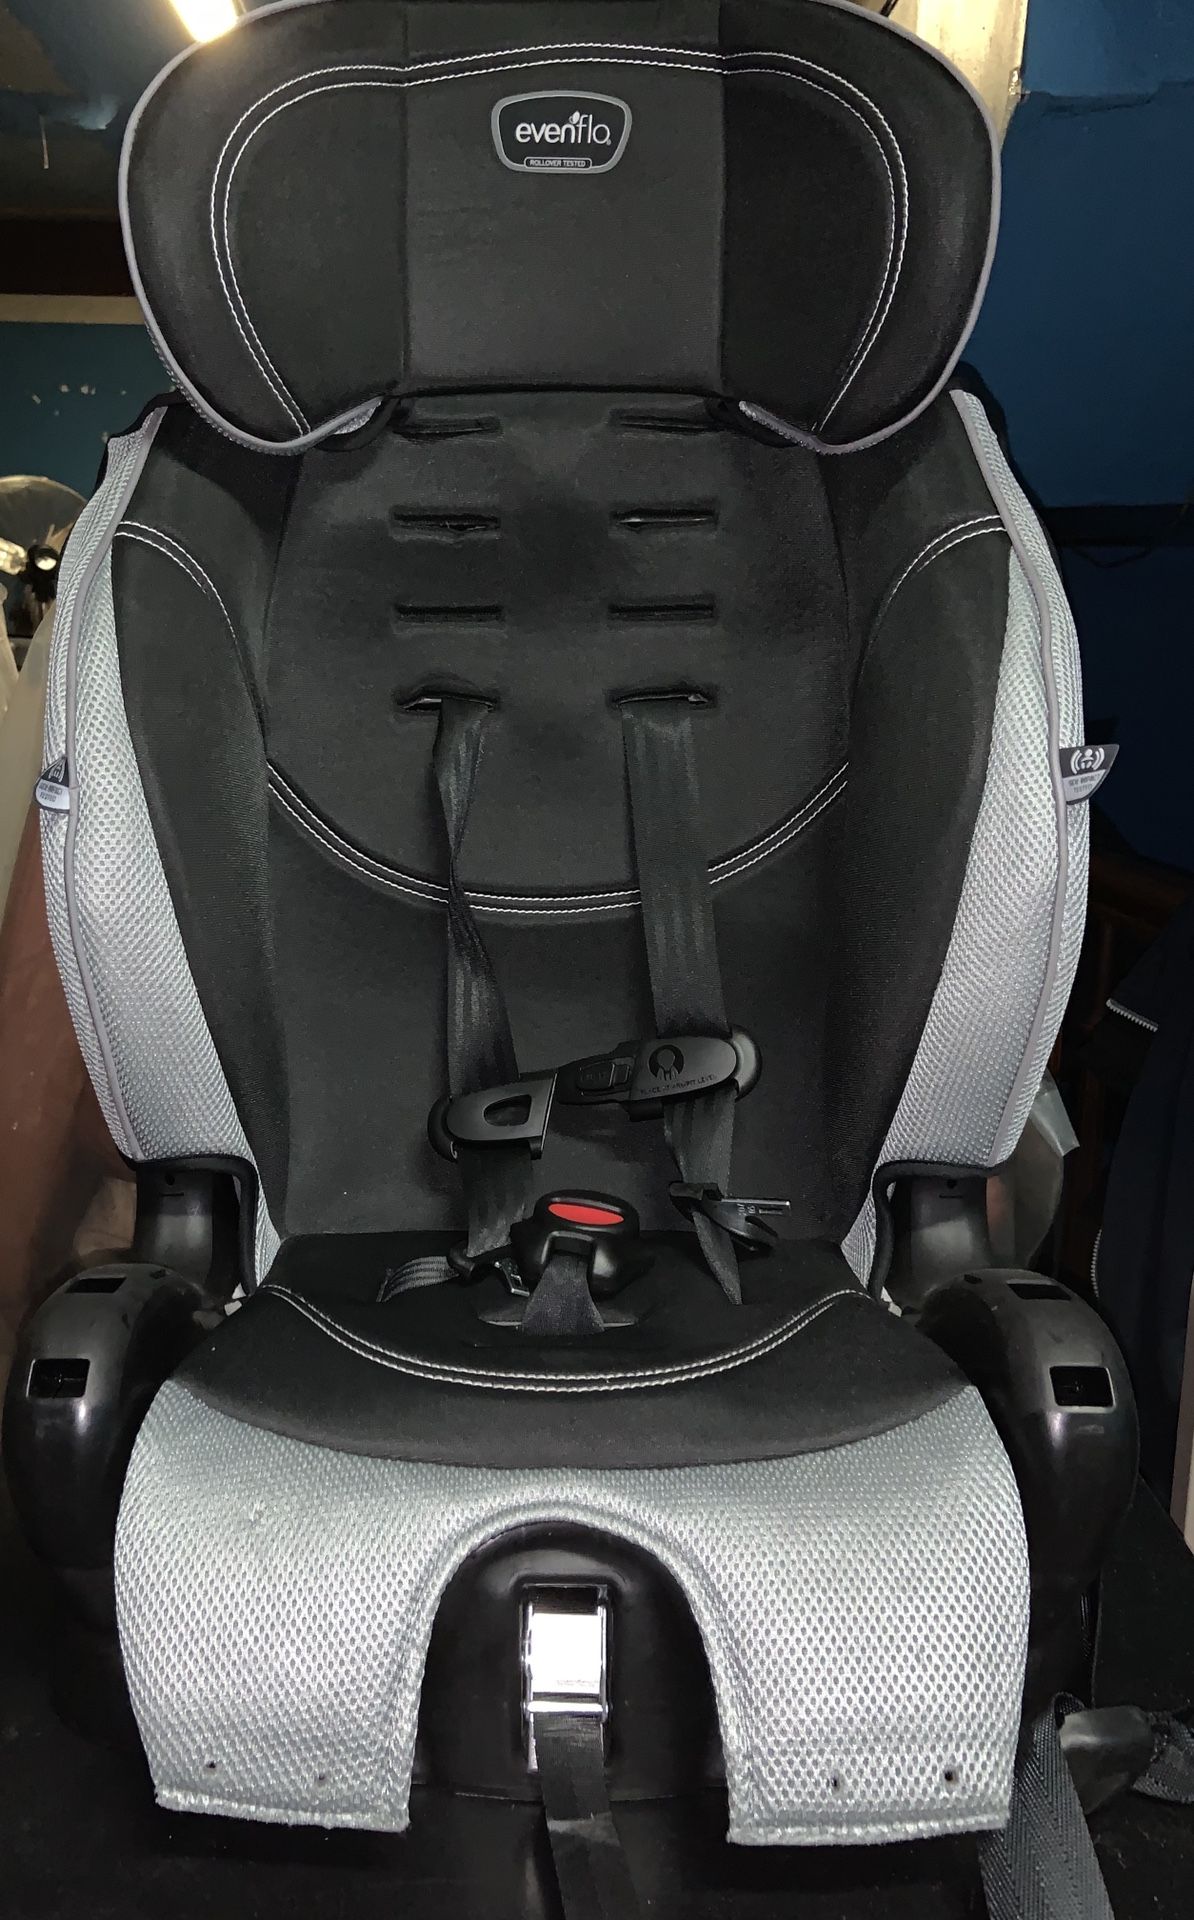 EvenFlo Rollover Tested, Side Impact Tested Booster Car Seat